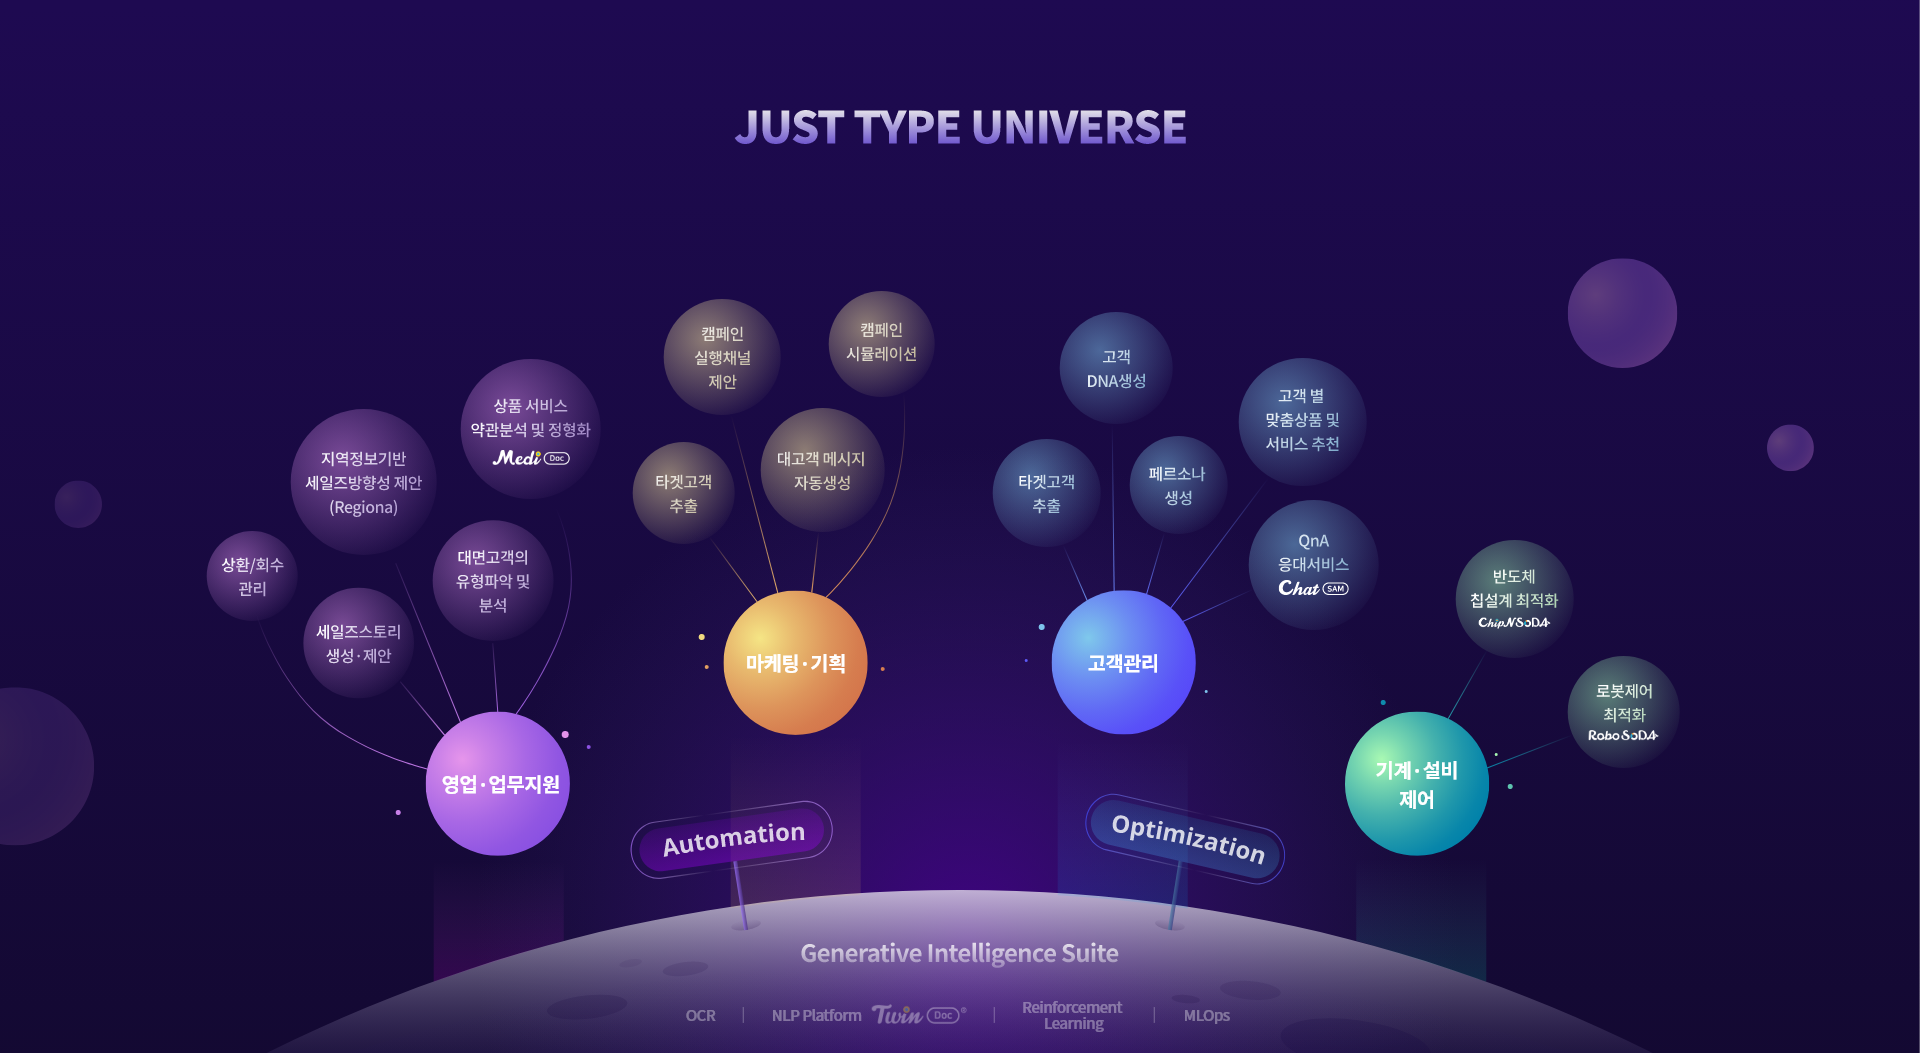 JUST TYPe Universe